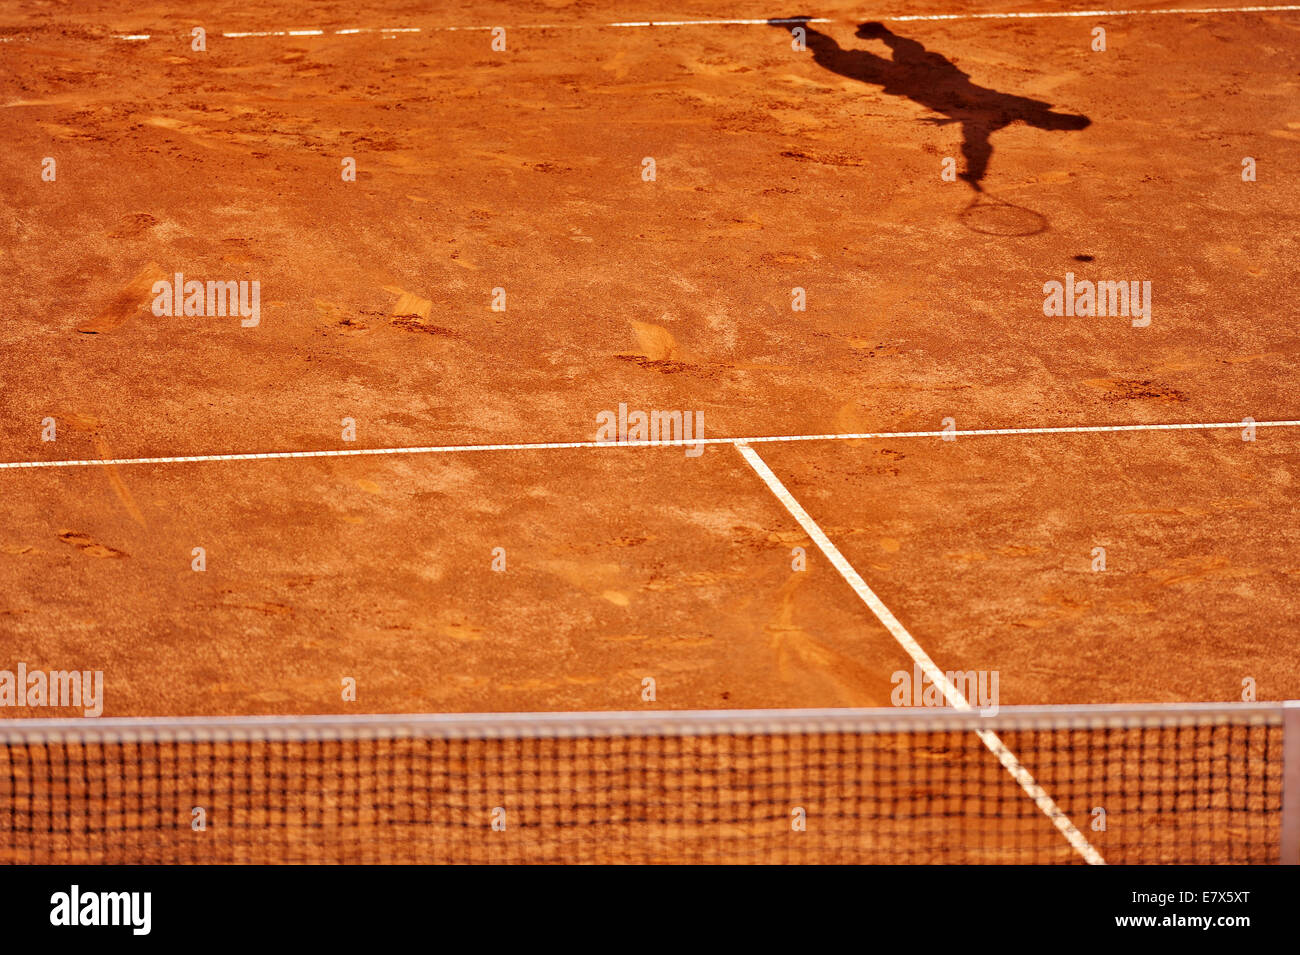 Shadow of a tennis player serving on a clay court Stock Photo